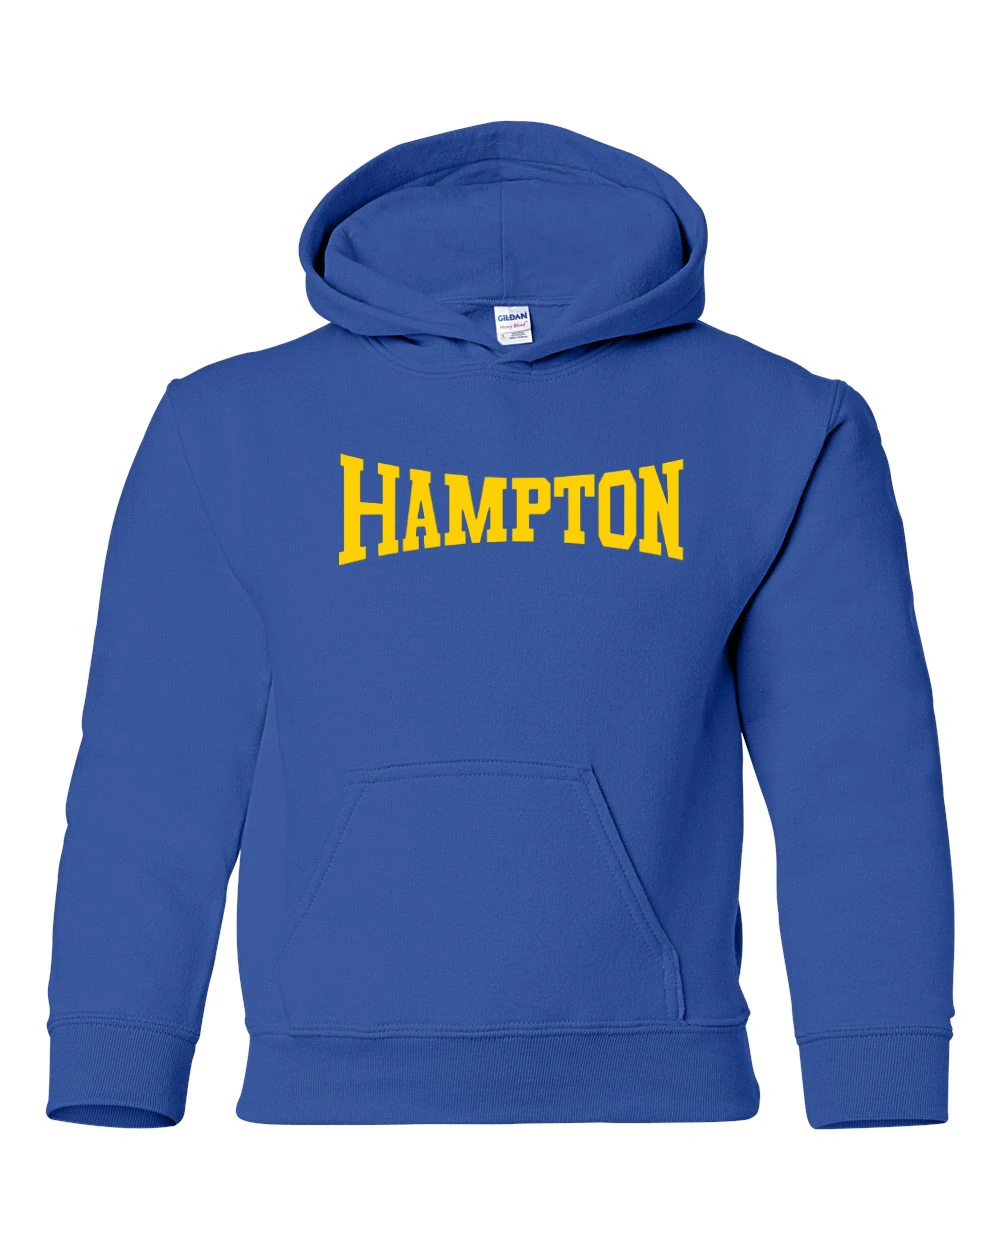 Hampton Central - 18500B Royal Blue Youth Pullover Hoodie